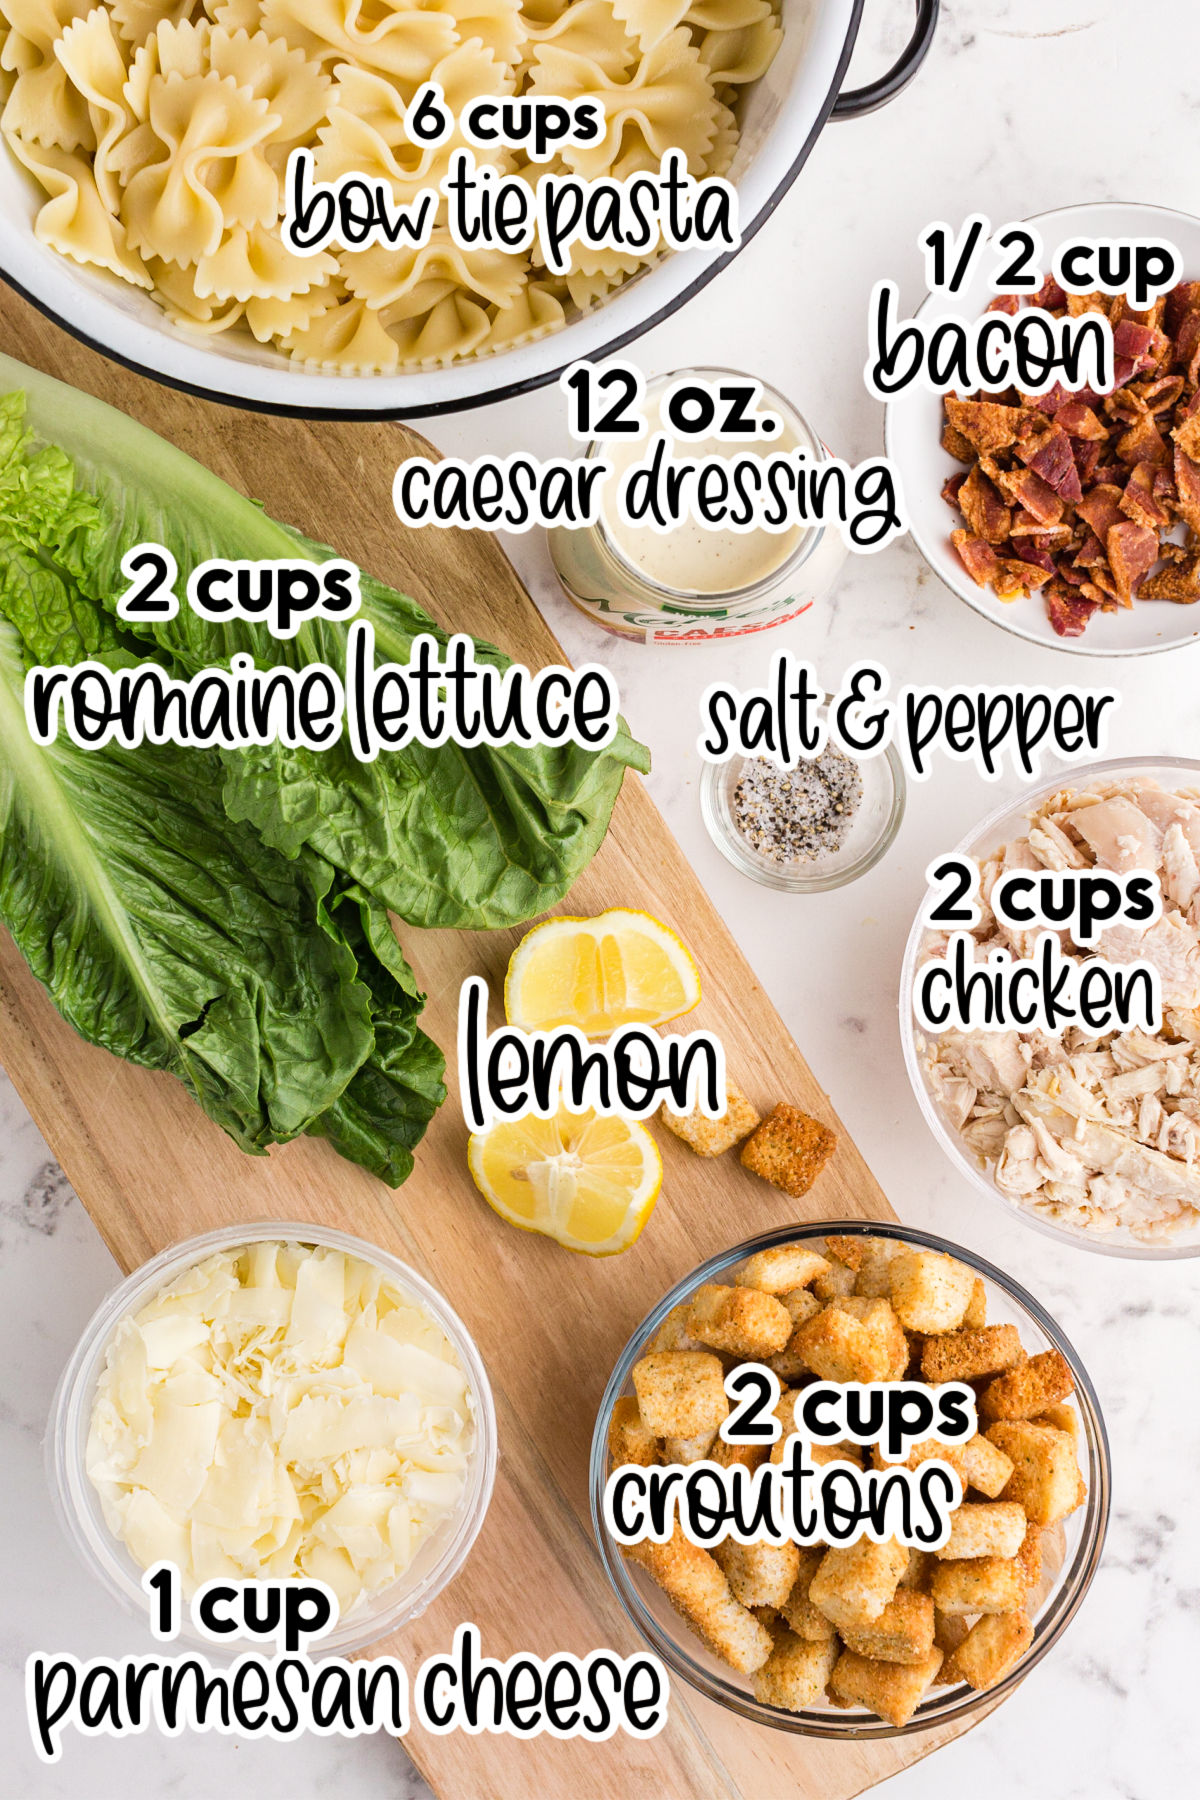 Individual ingredients for chicken caesar pasta salad with text and amount labels.